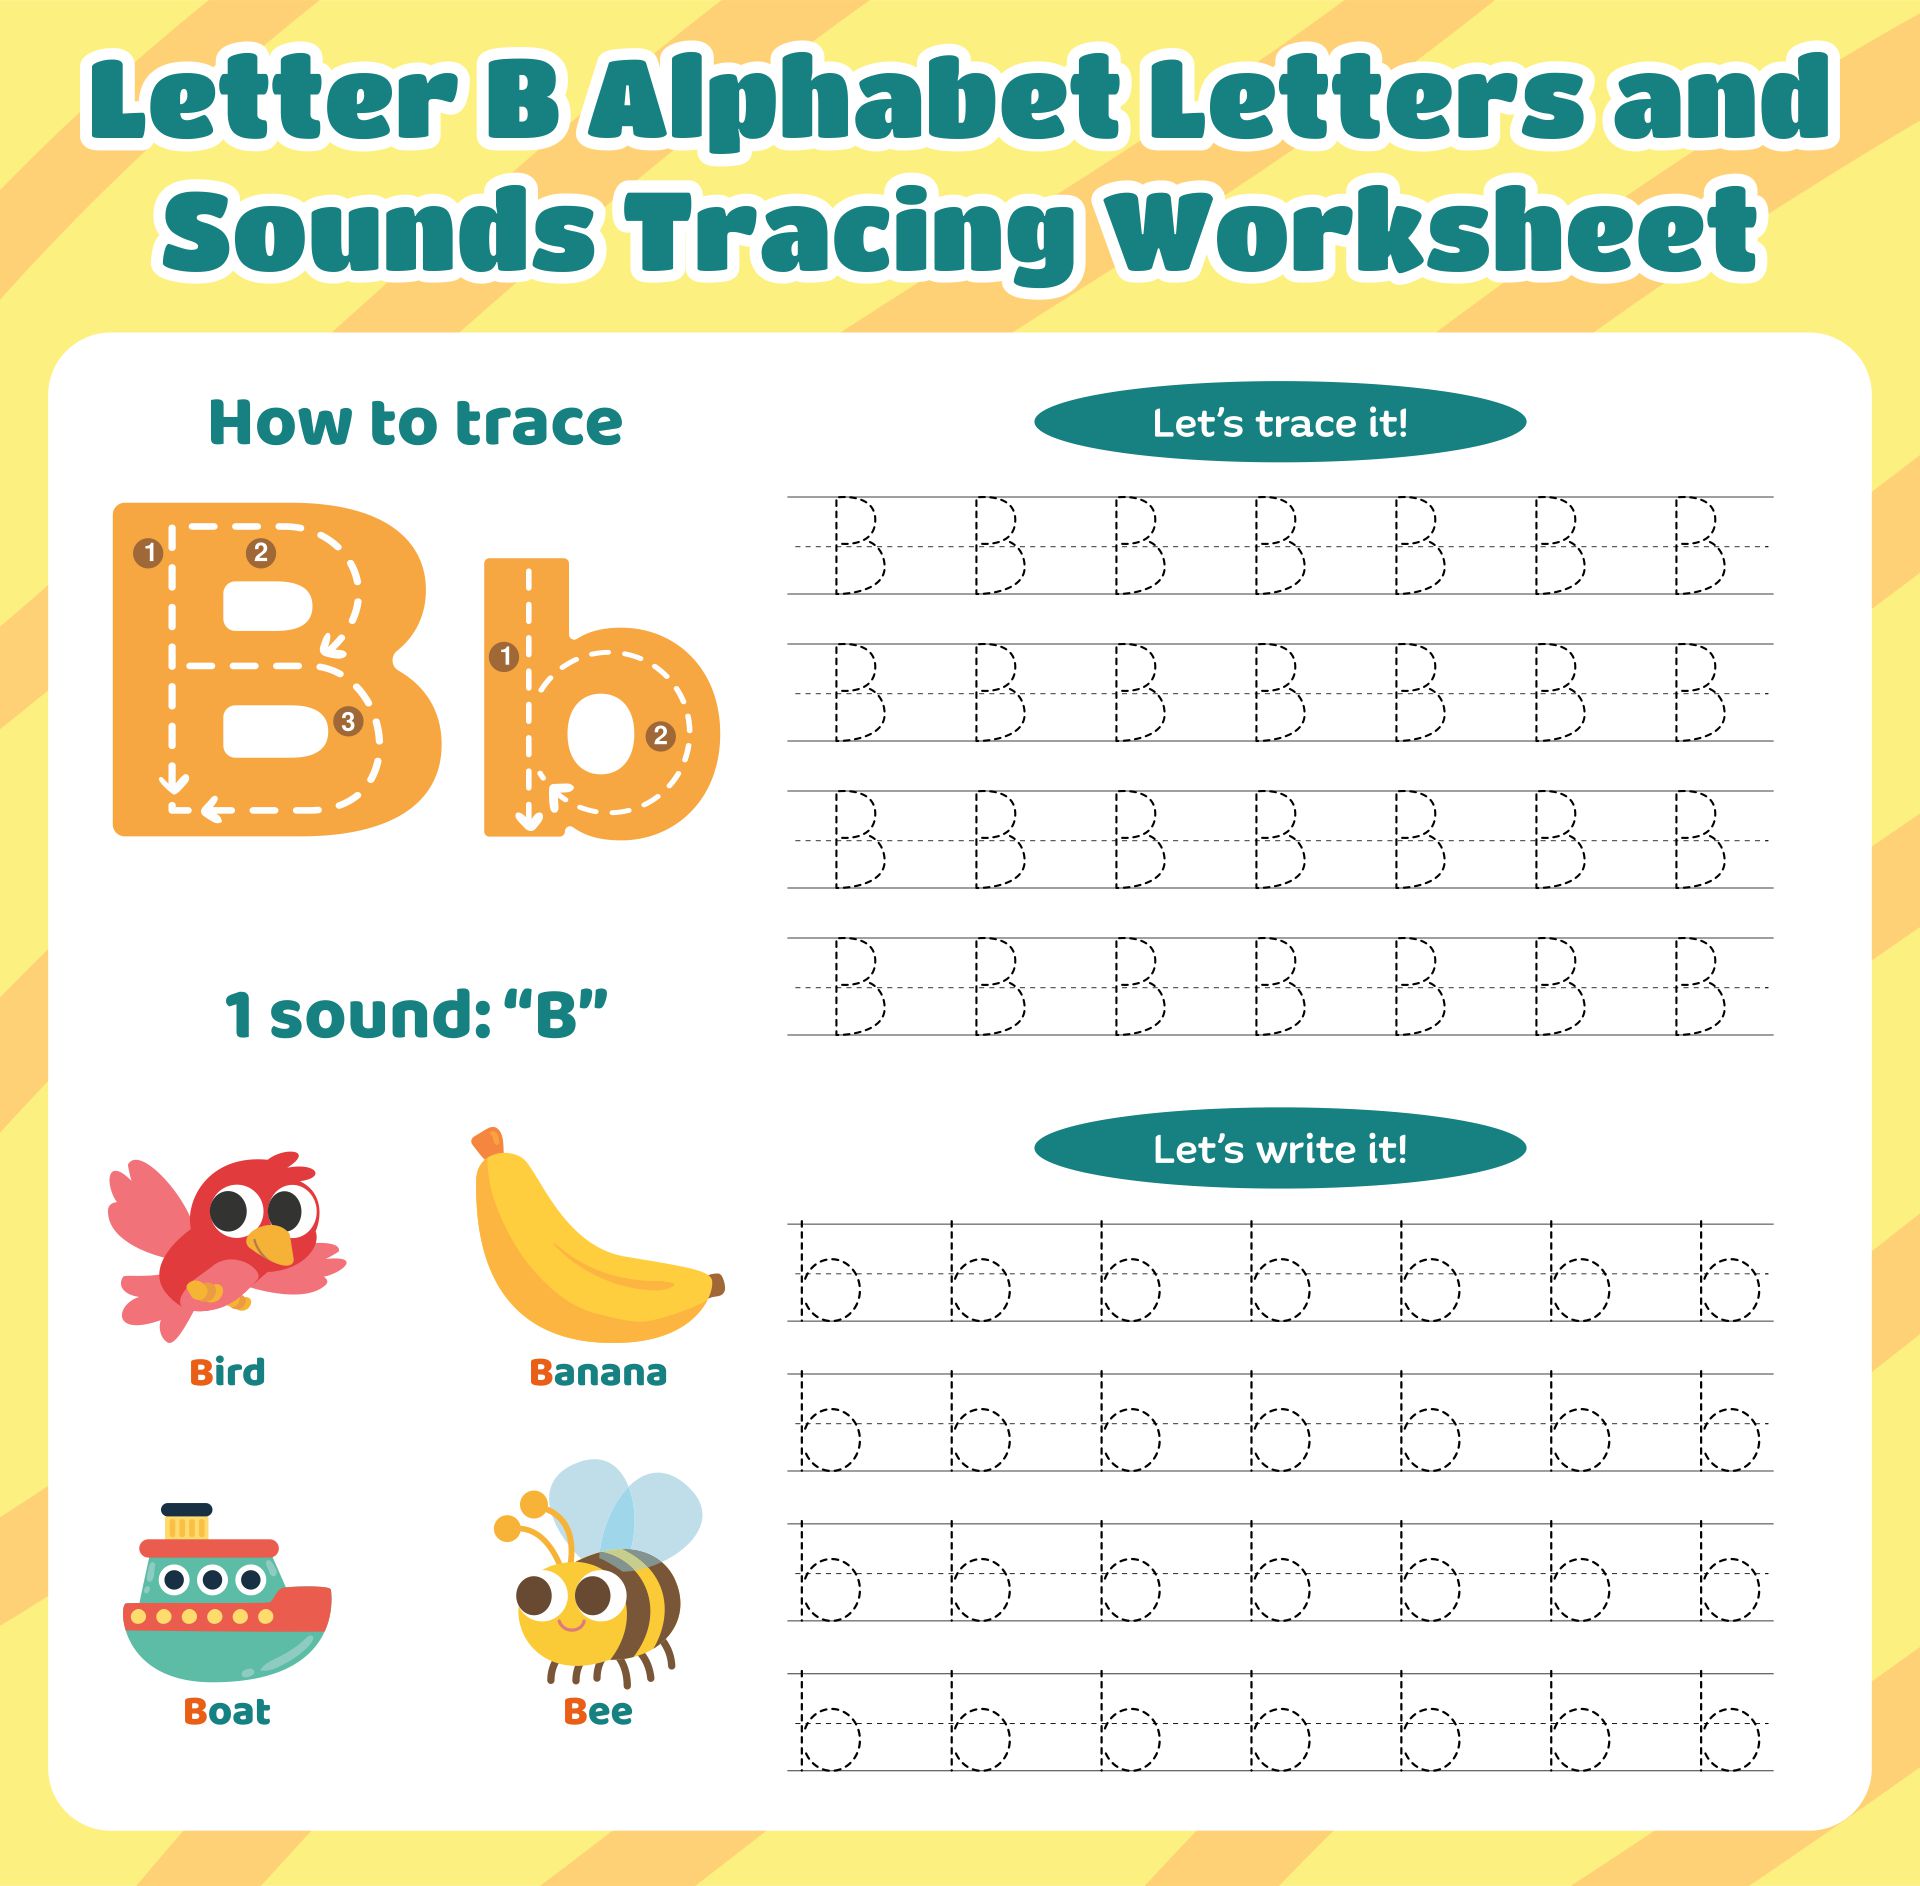 Printable Letter B Alphabet Letters And Sounds Tracing Worksheet